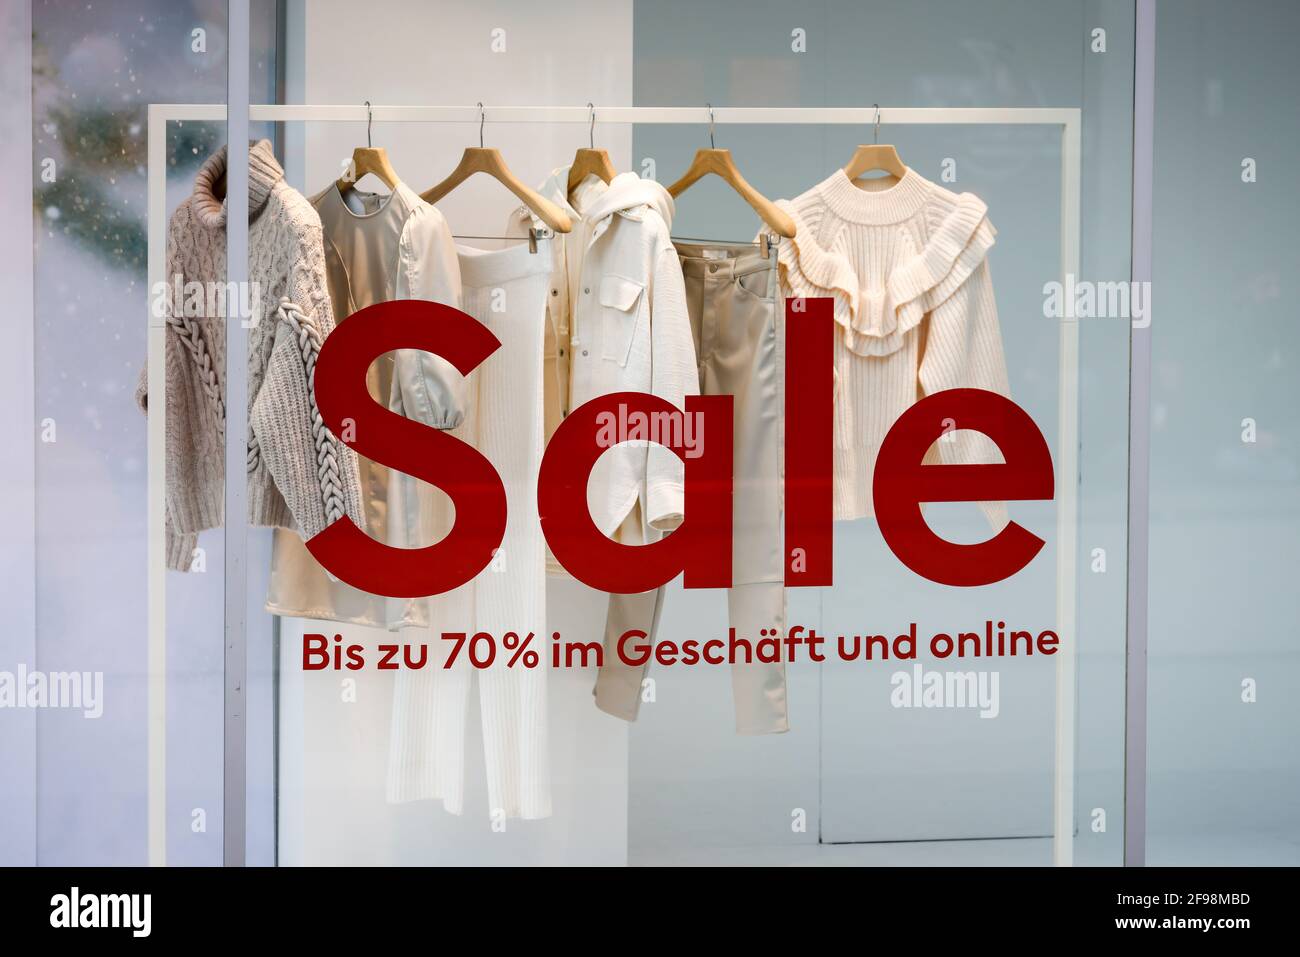 Bonmarche fashion shop store in High Street, Southend on Sea, Essex, UK  with sale signs in shop window. Half price, mega deals. Passers by Stock  Photo - Alamy